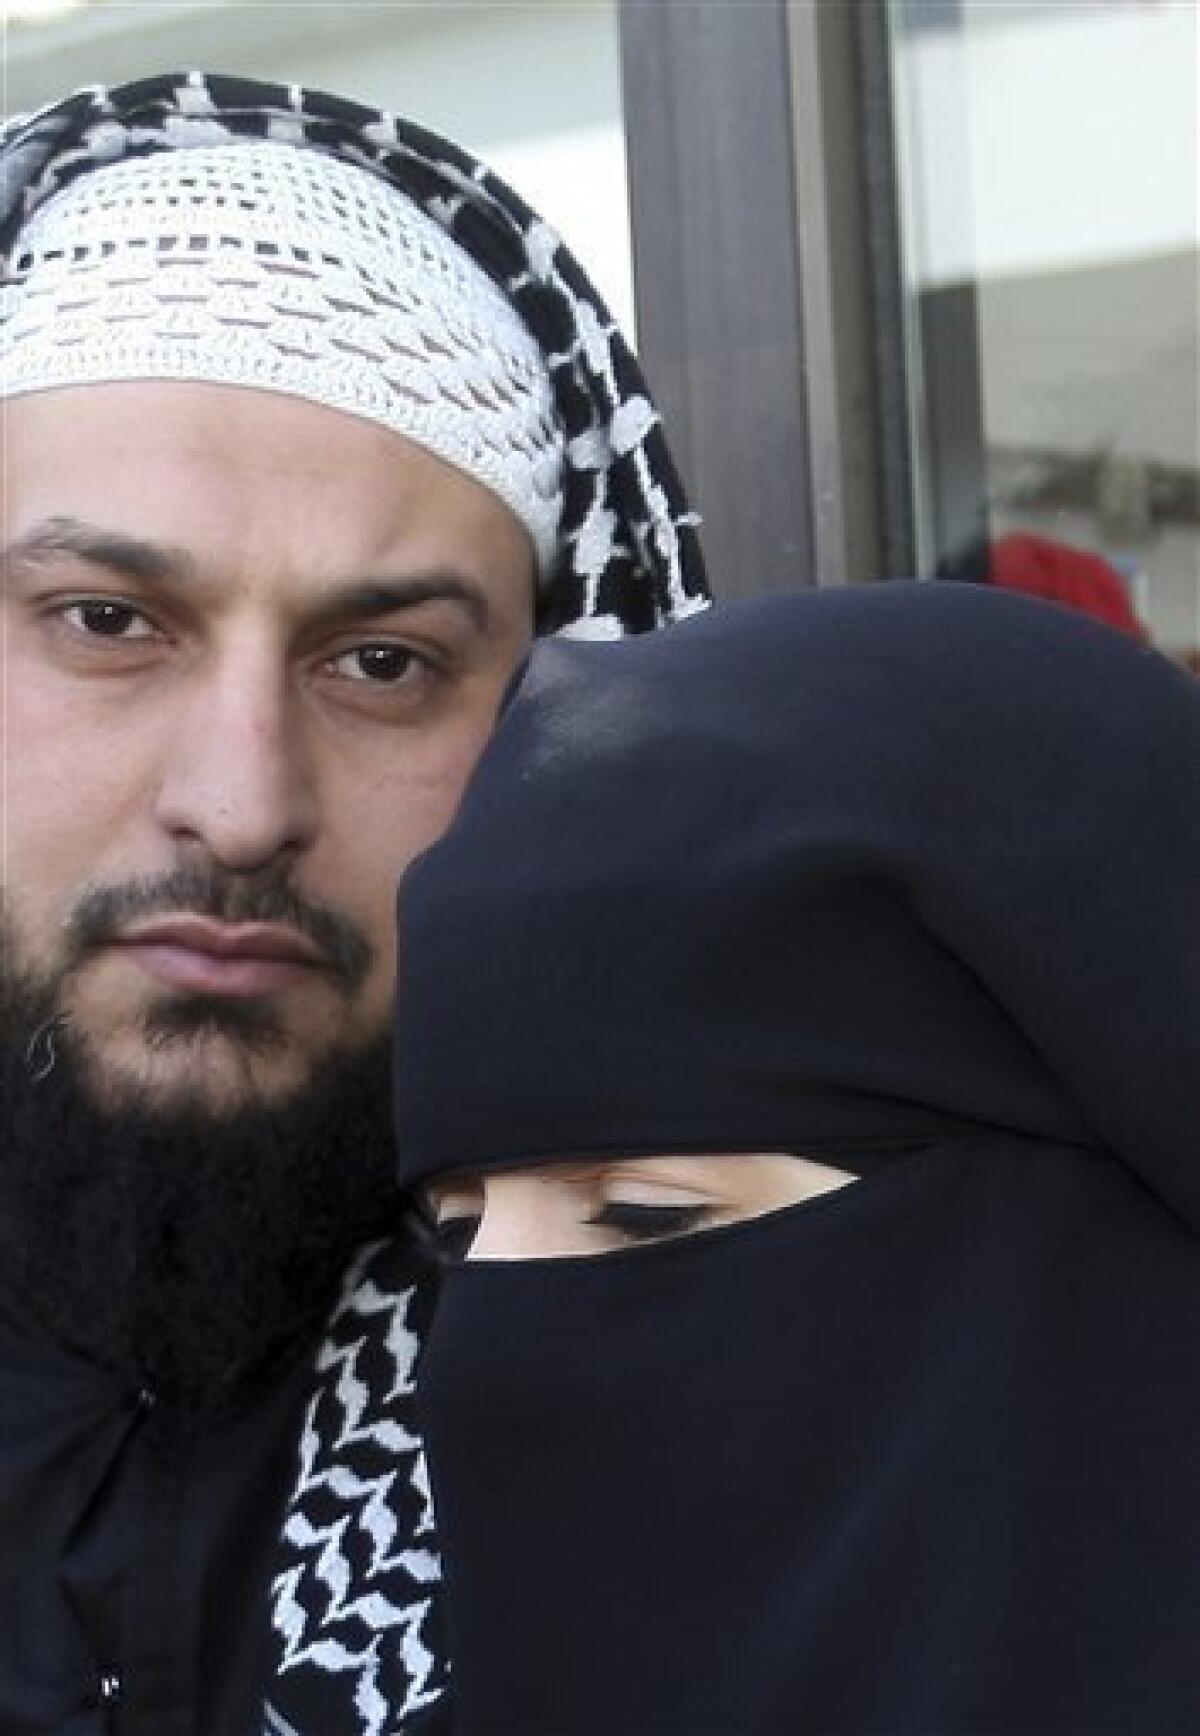 FILE - In this April 23, 2010 picture Lies Hebbadj, left, and his wife Sandrine Mouleres , speak to reporters in Nantes, western France. A French court on Monday Dec. 12, 2010 annulled a fine given to a woman driver wearing an Islamic face veil before France's nationwide ban on the garments goes into effect. Traffic police in the western city of Nantes had fined 31-year-old Sandrine Mouleres in April, saying she did not have a clear field of vision. The fine was just euros22, ($29) but drew widespread attention amid nationwide debate over the place of Islamic veils in today's France. (AP Photo/David Vincent, File)